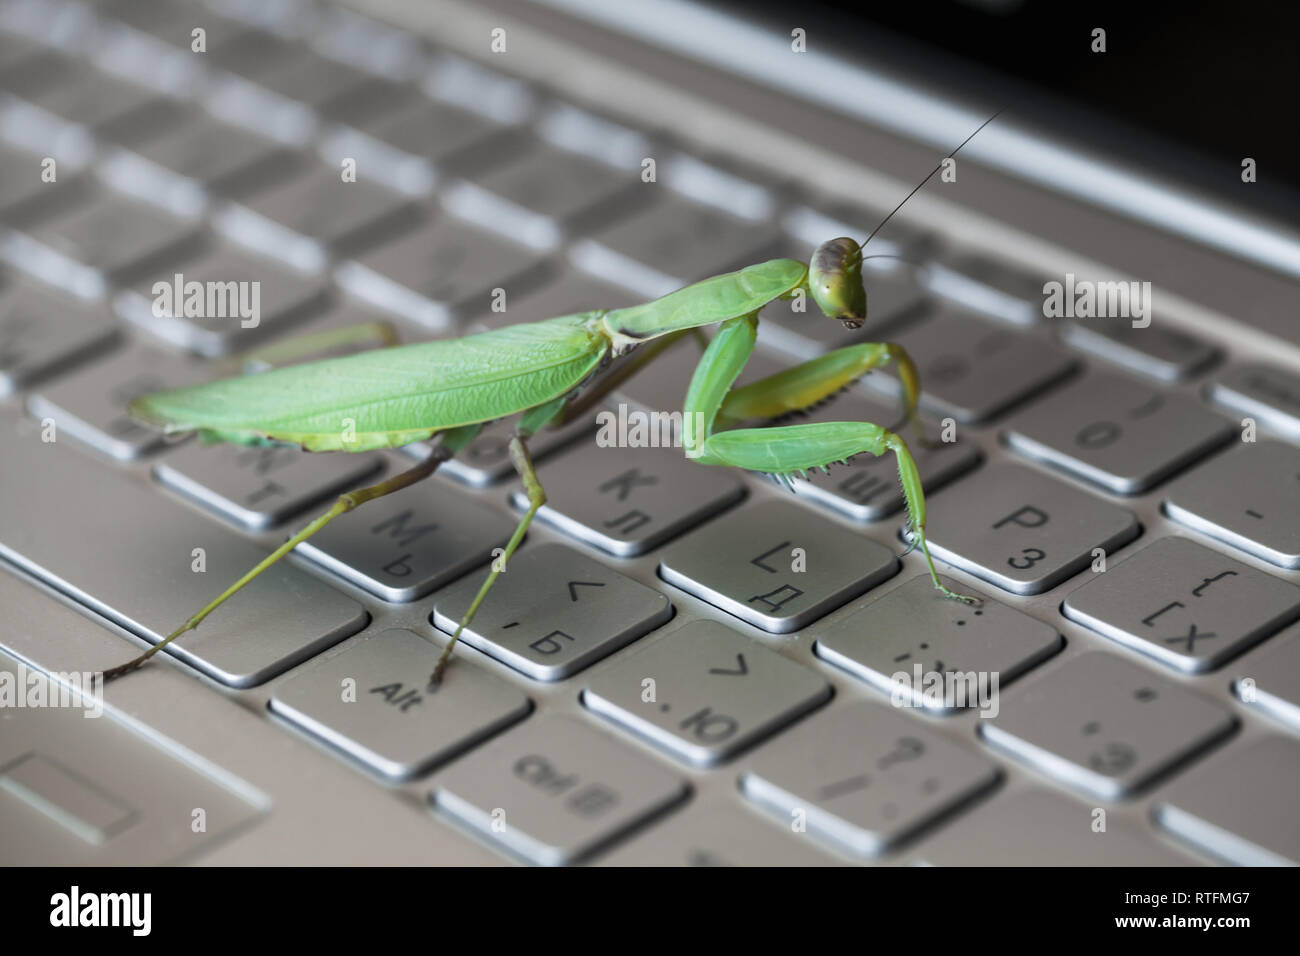 Software bug metaphor, mantis walks on a laptop keyboard with English and Russian letters Stock Photo